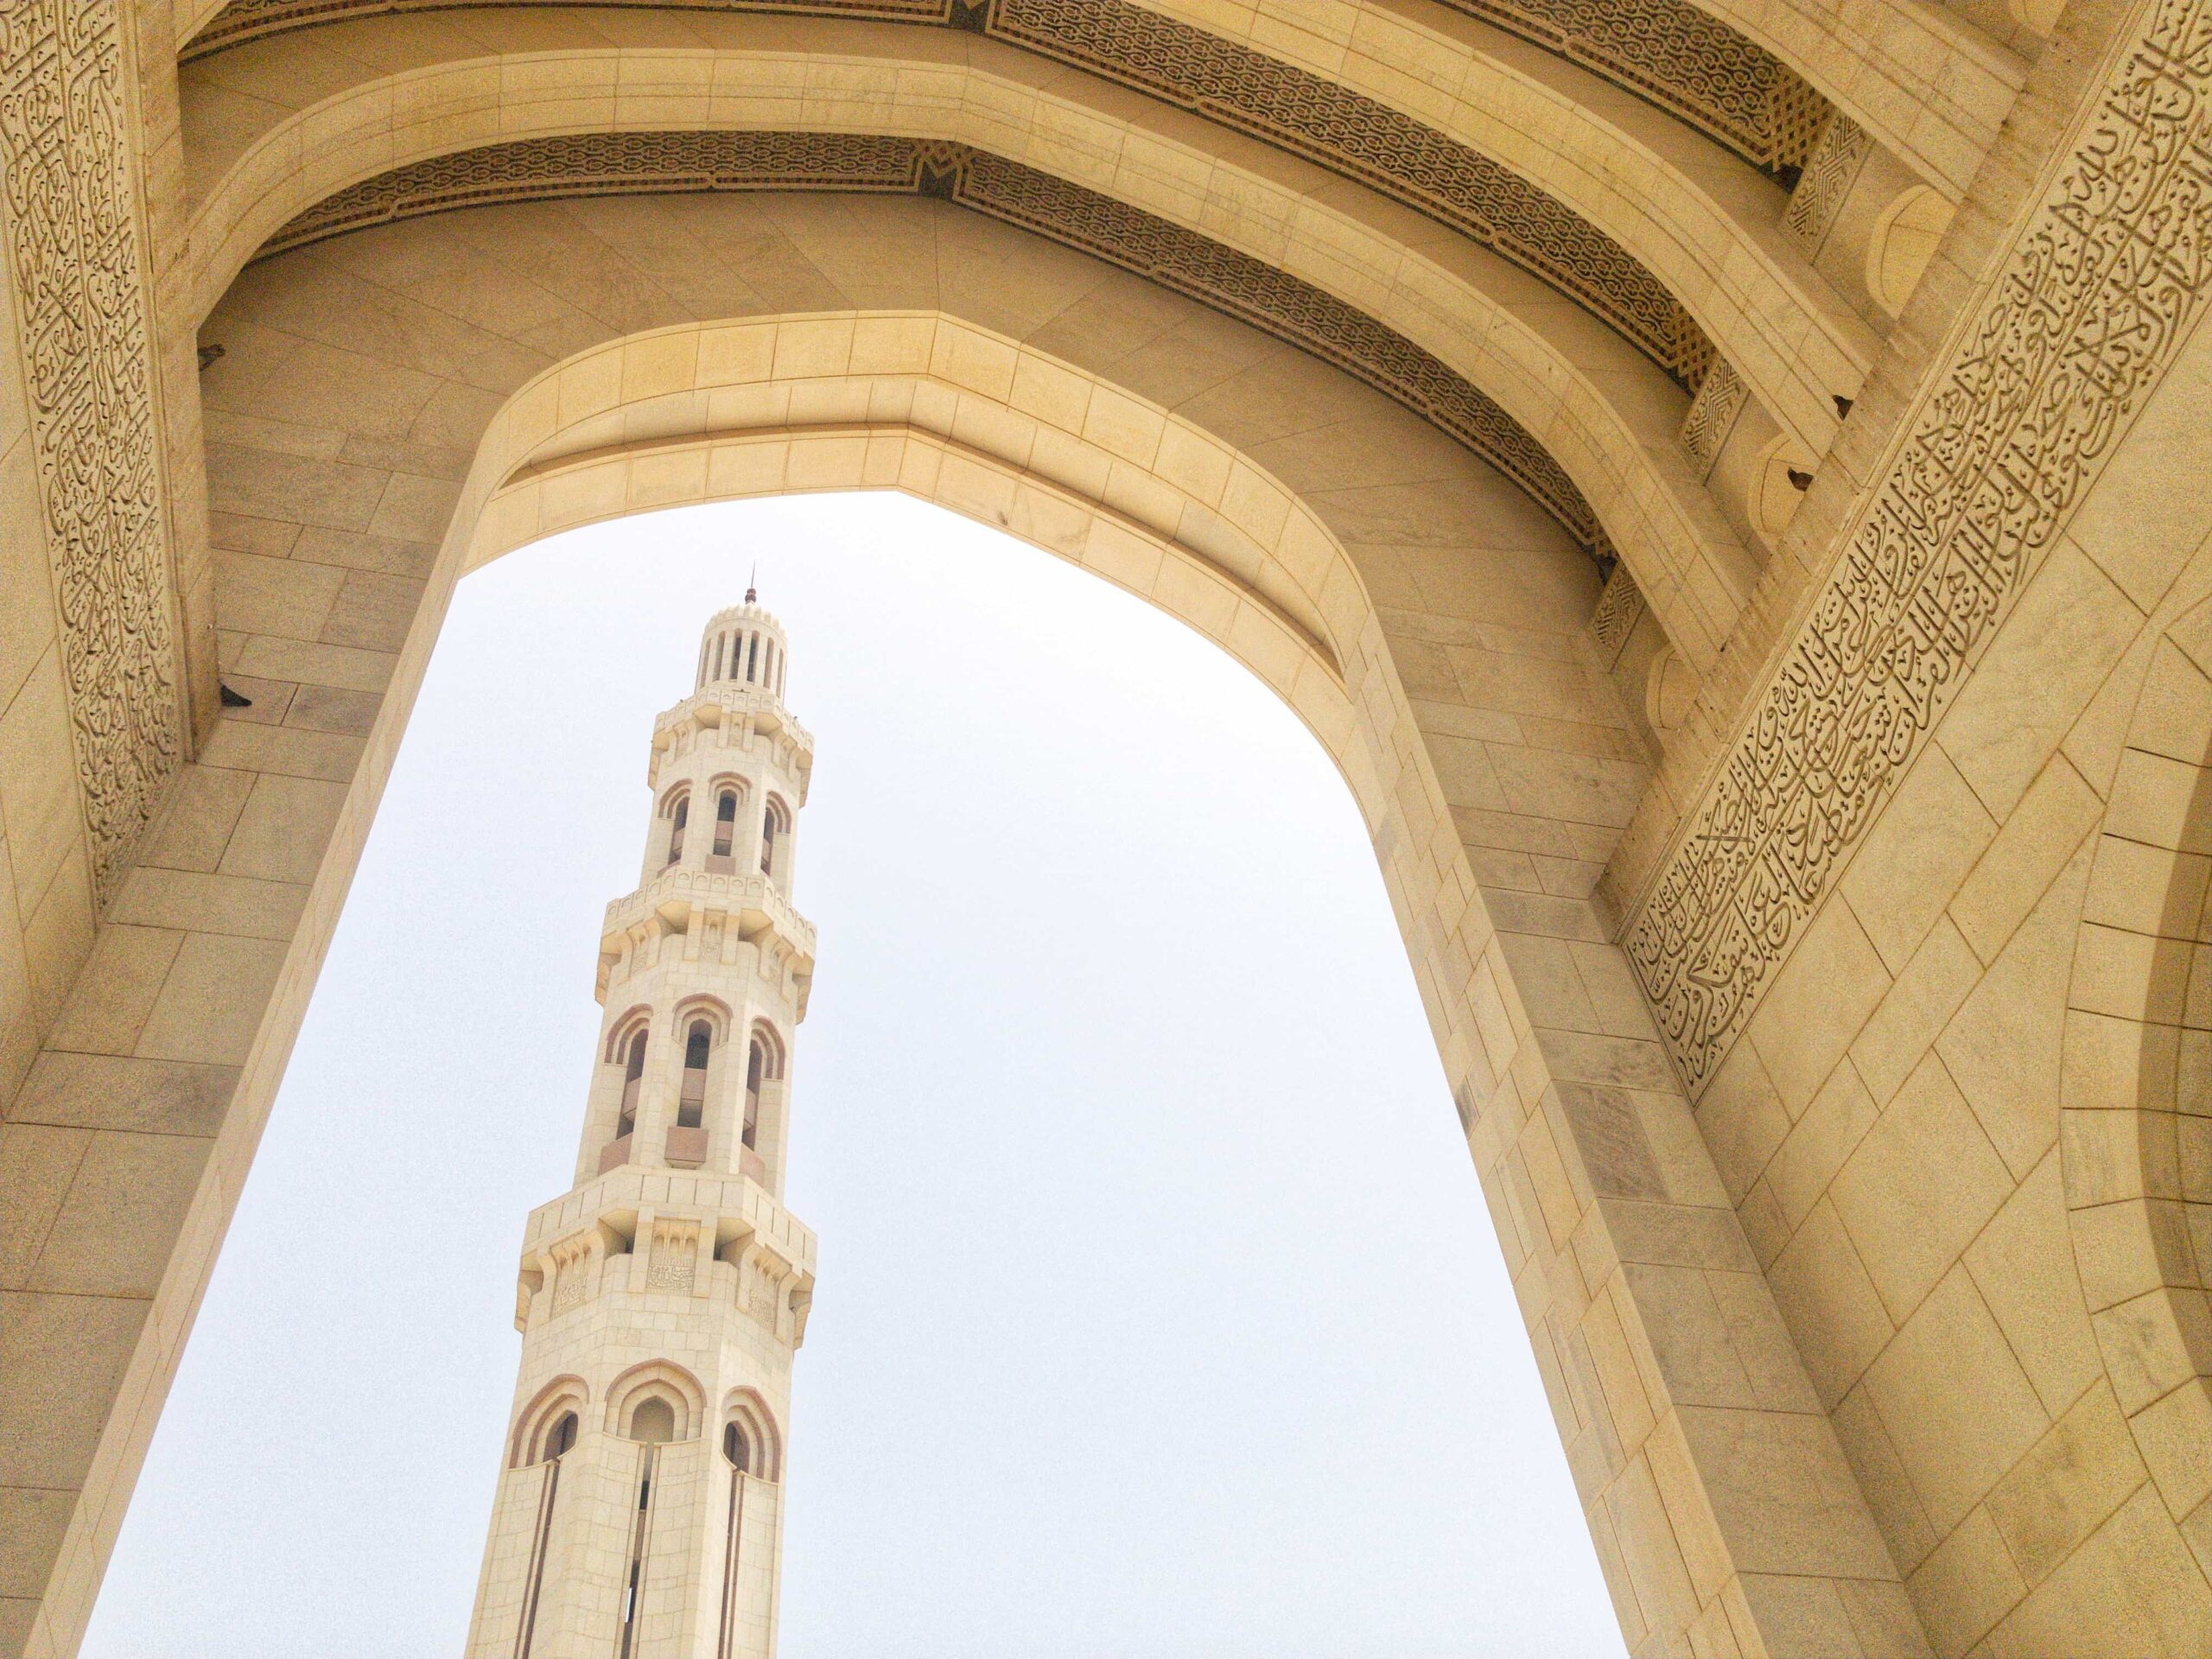 An Interior view of the Sultan Qaboos with a minaret seen across